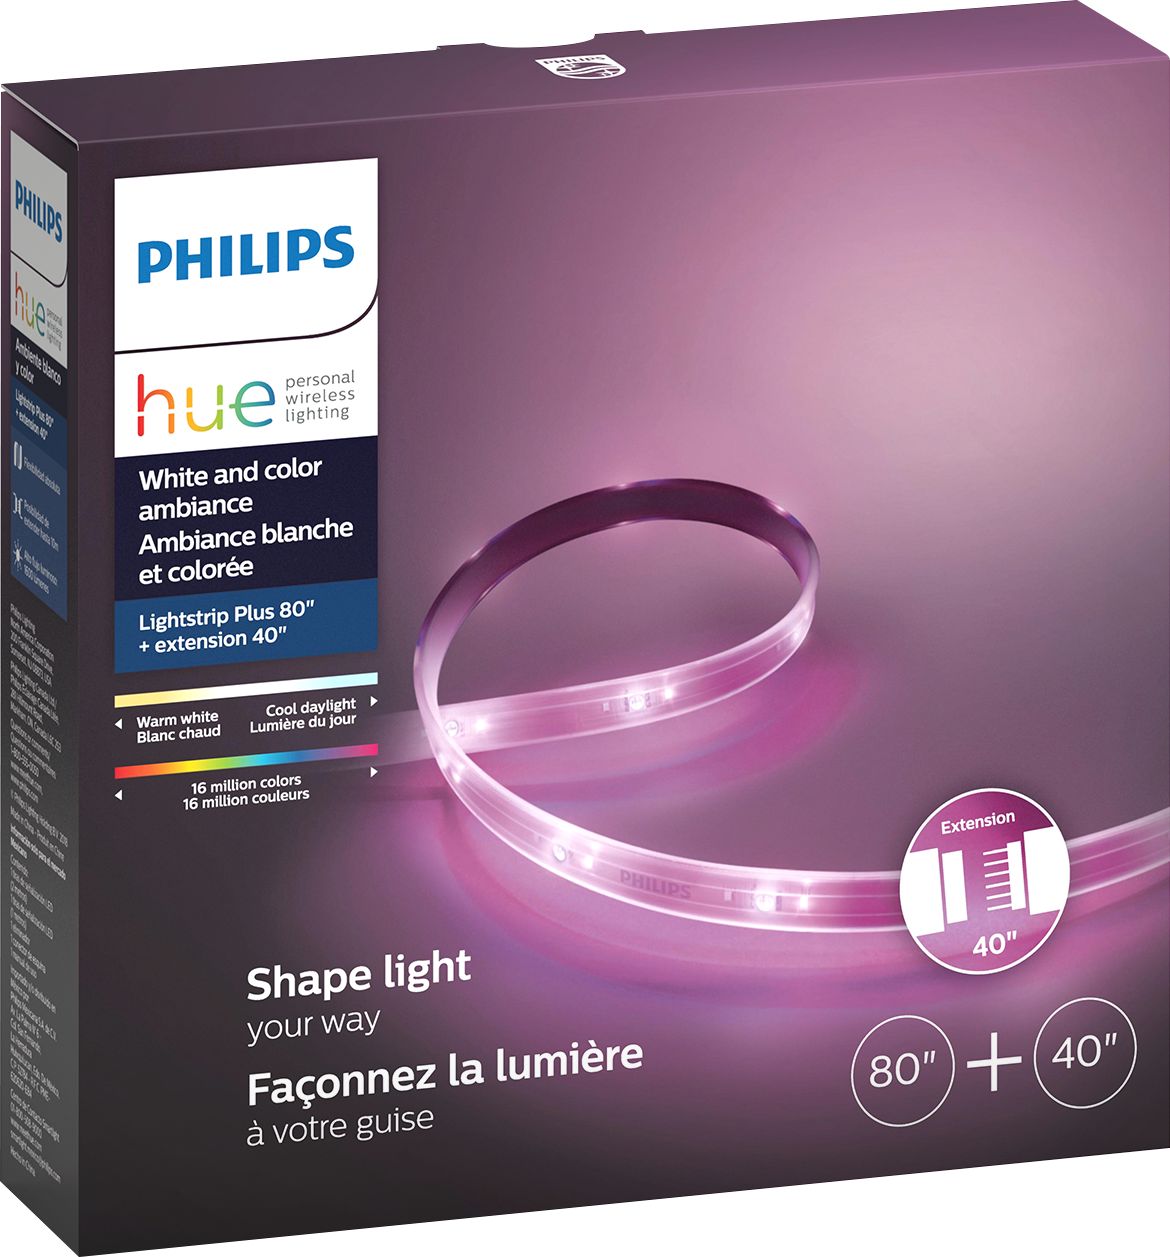 Extending a Philips Ambilight with Philips hue LED strips behind